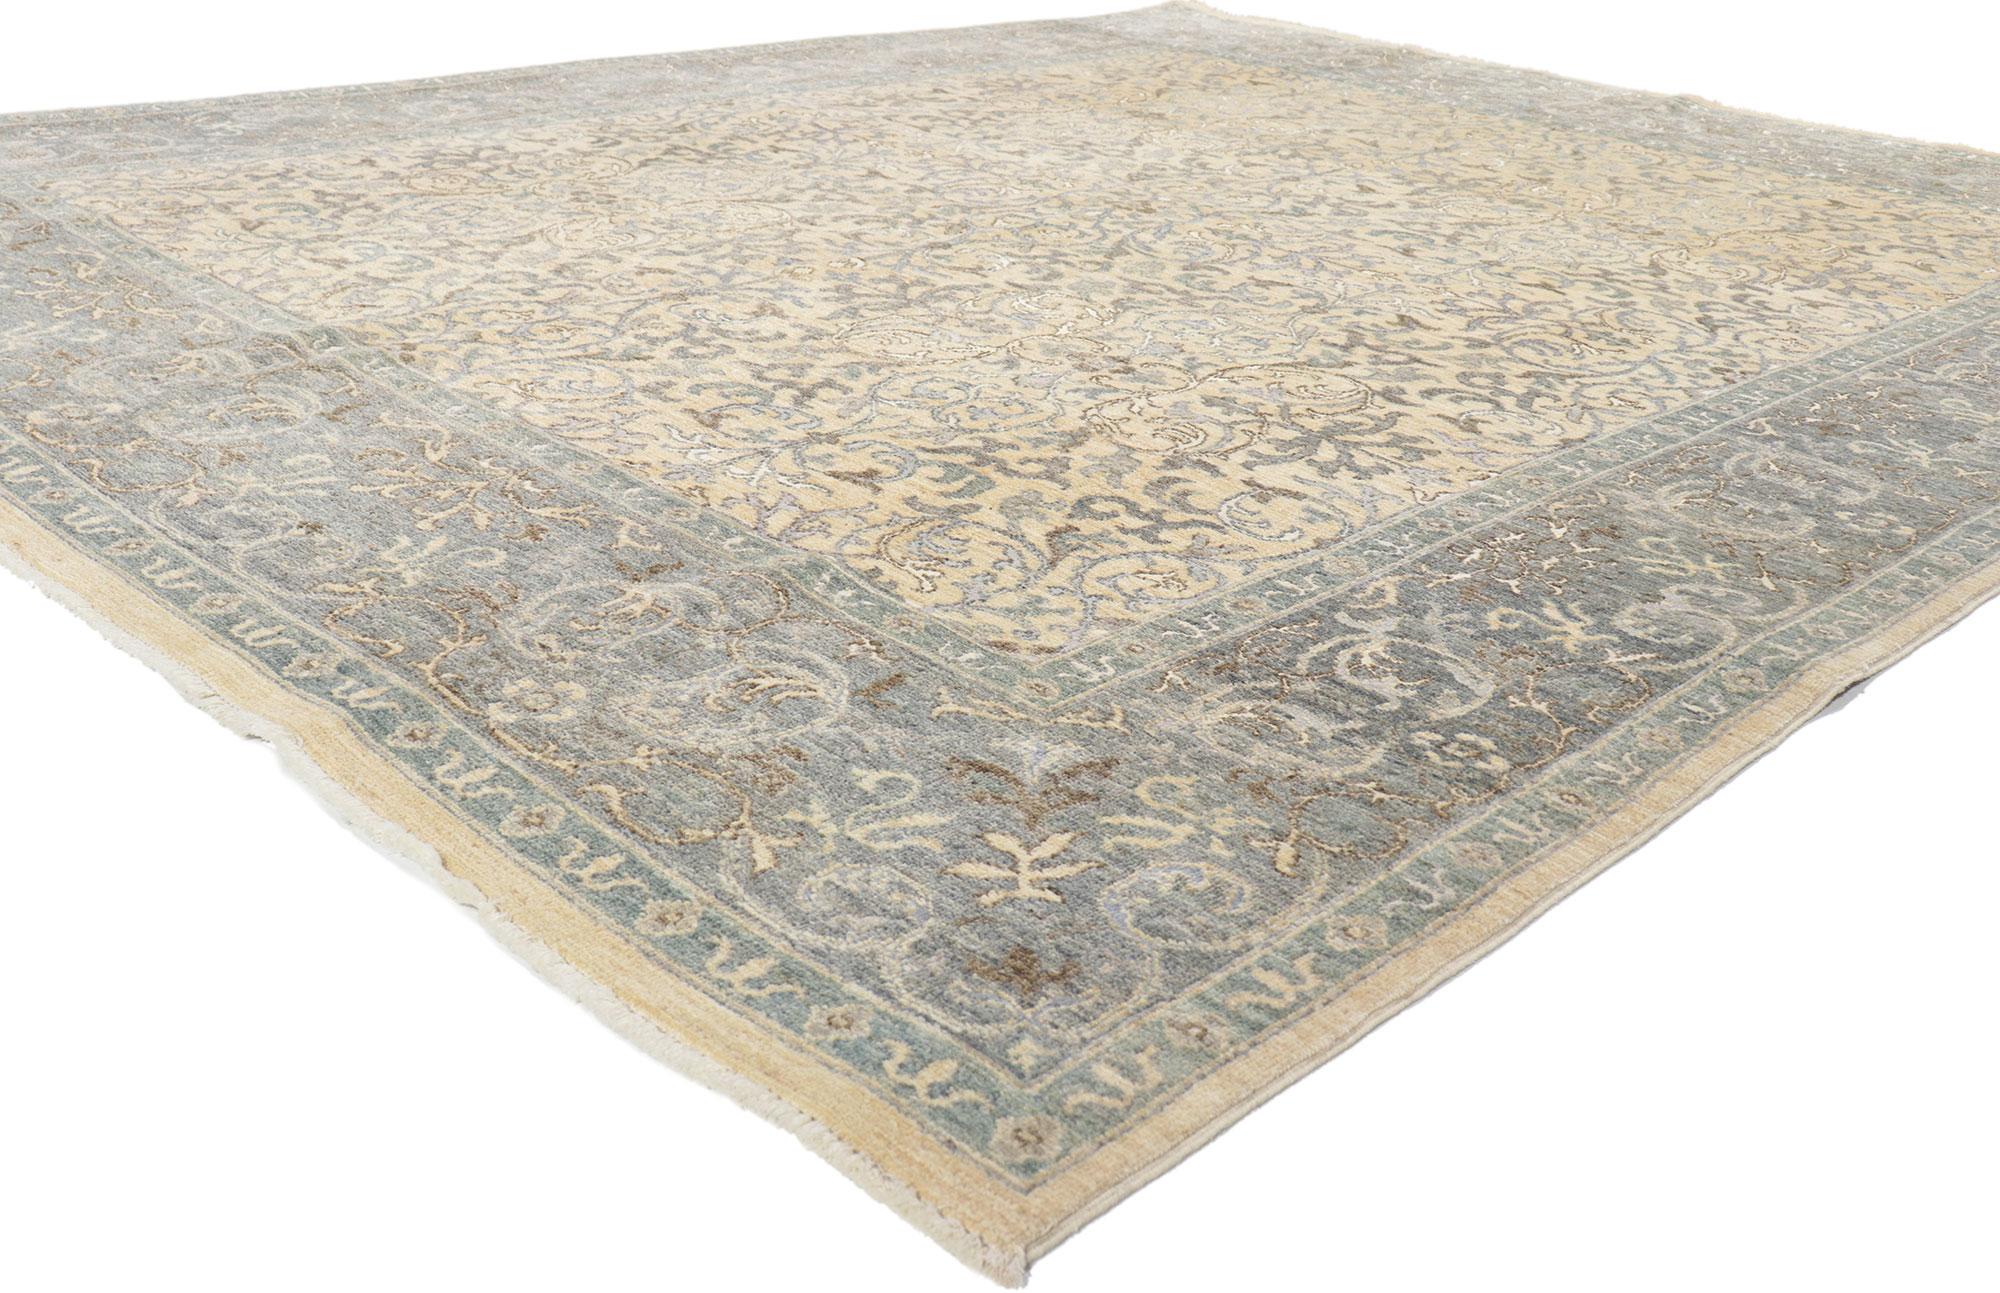 80191 New Transitional Damask Rug, 08'00 x 09'09. 
Emanating modern renaissance syle with incredible detail and texture, this transitional damask rug is a captivating vision of woven beauty. The arabesque allover pattern and earthy colorway woven